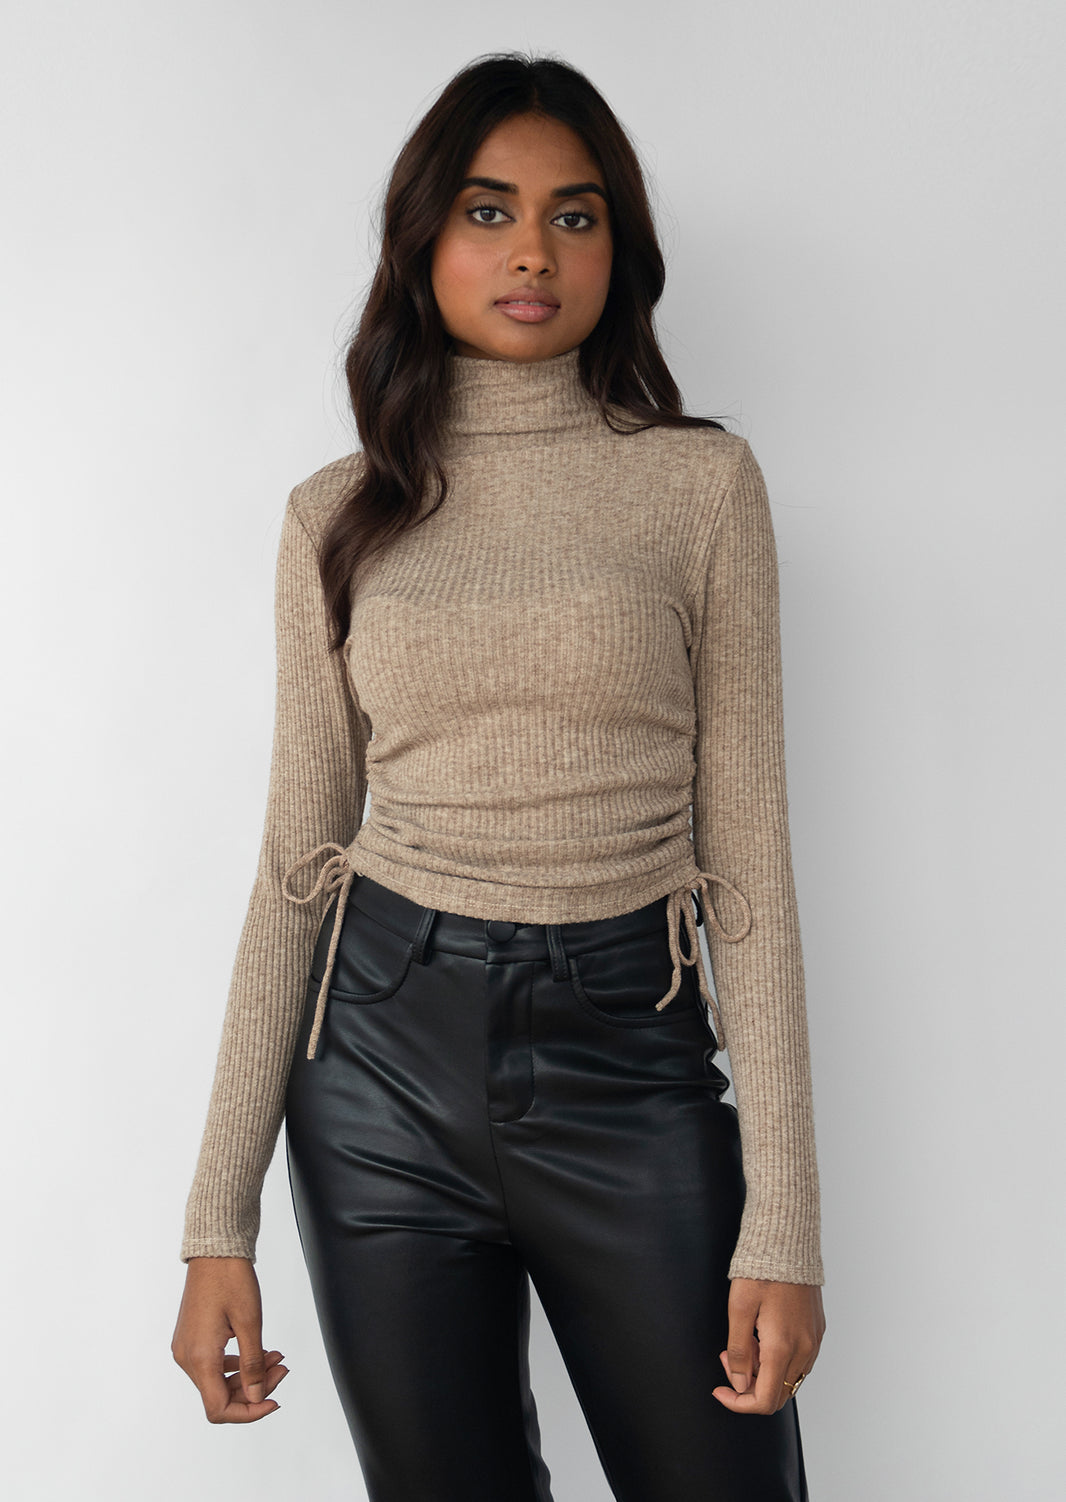 High neck jumper with ruched side detail in camel